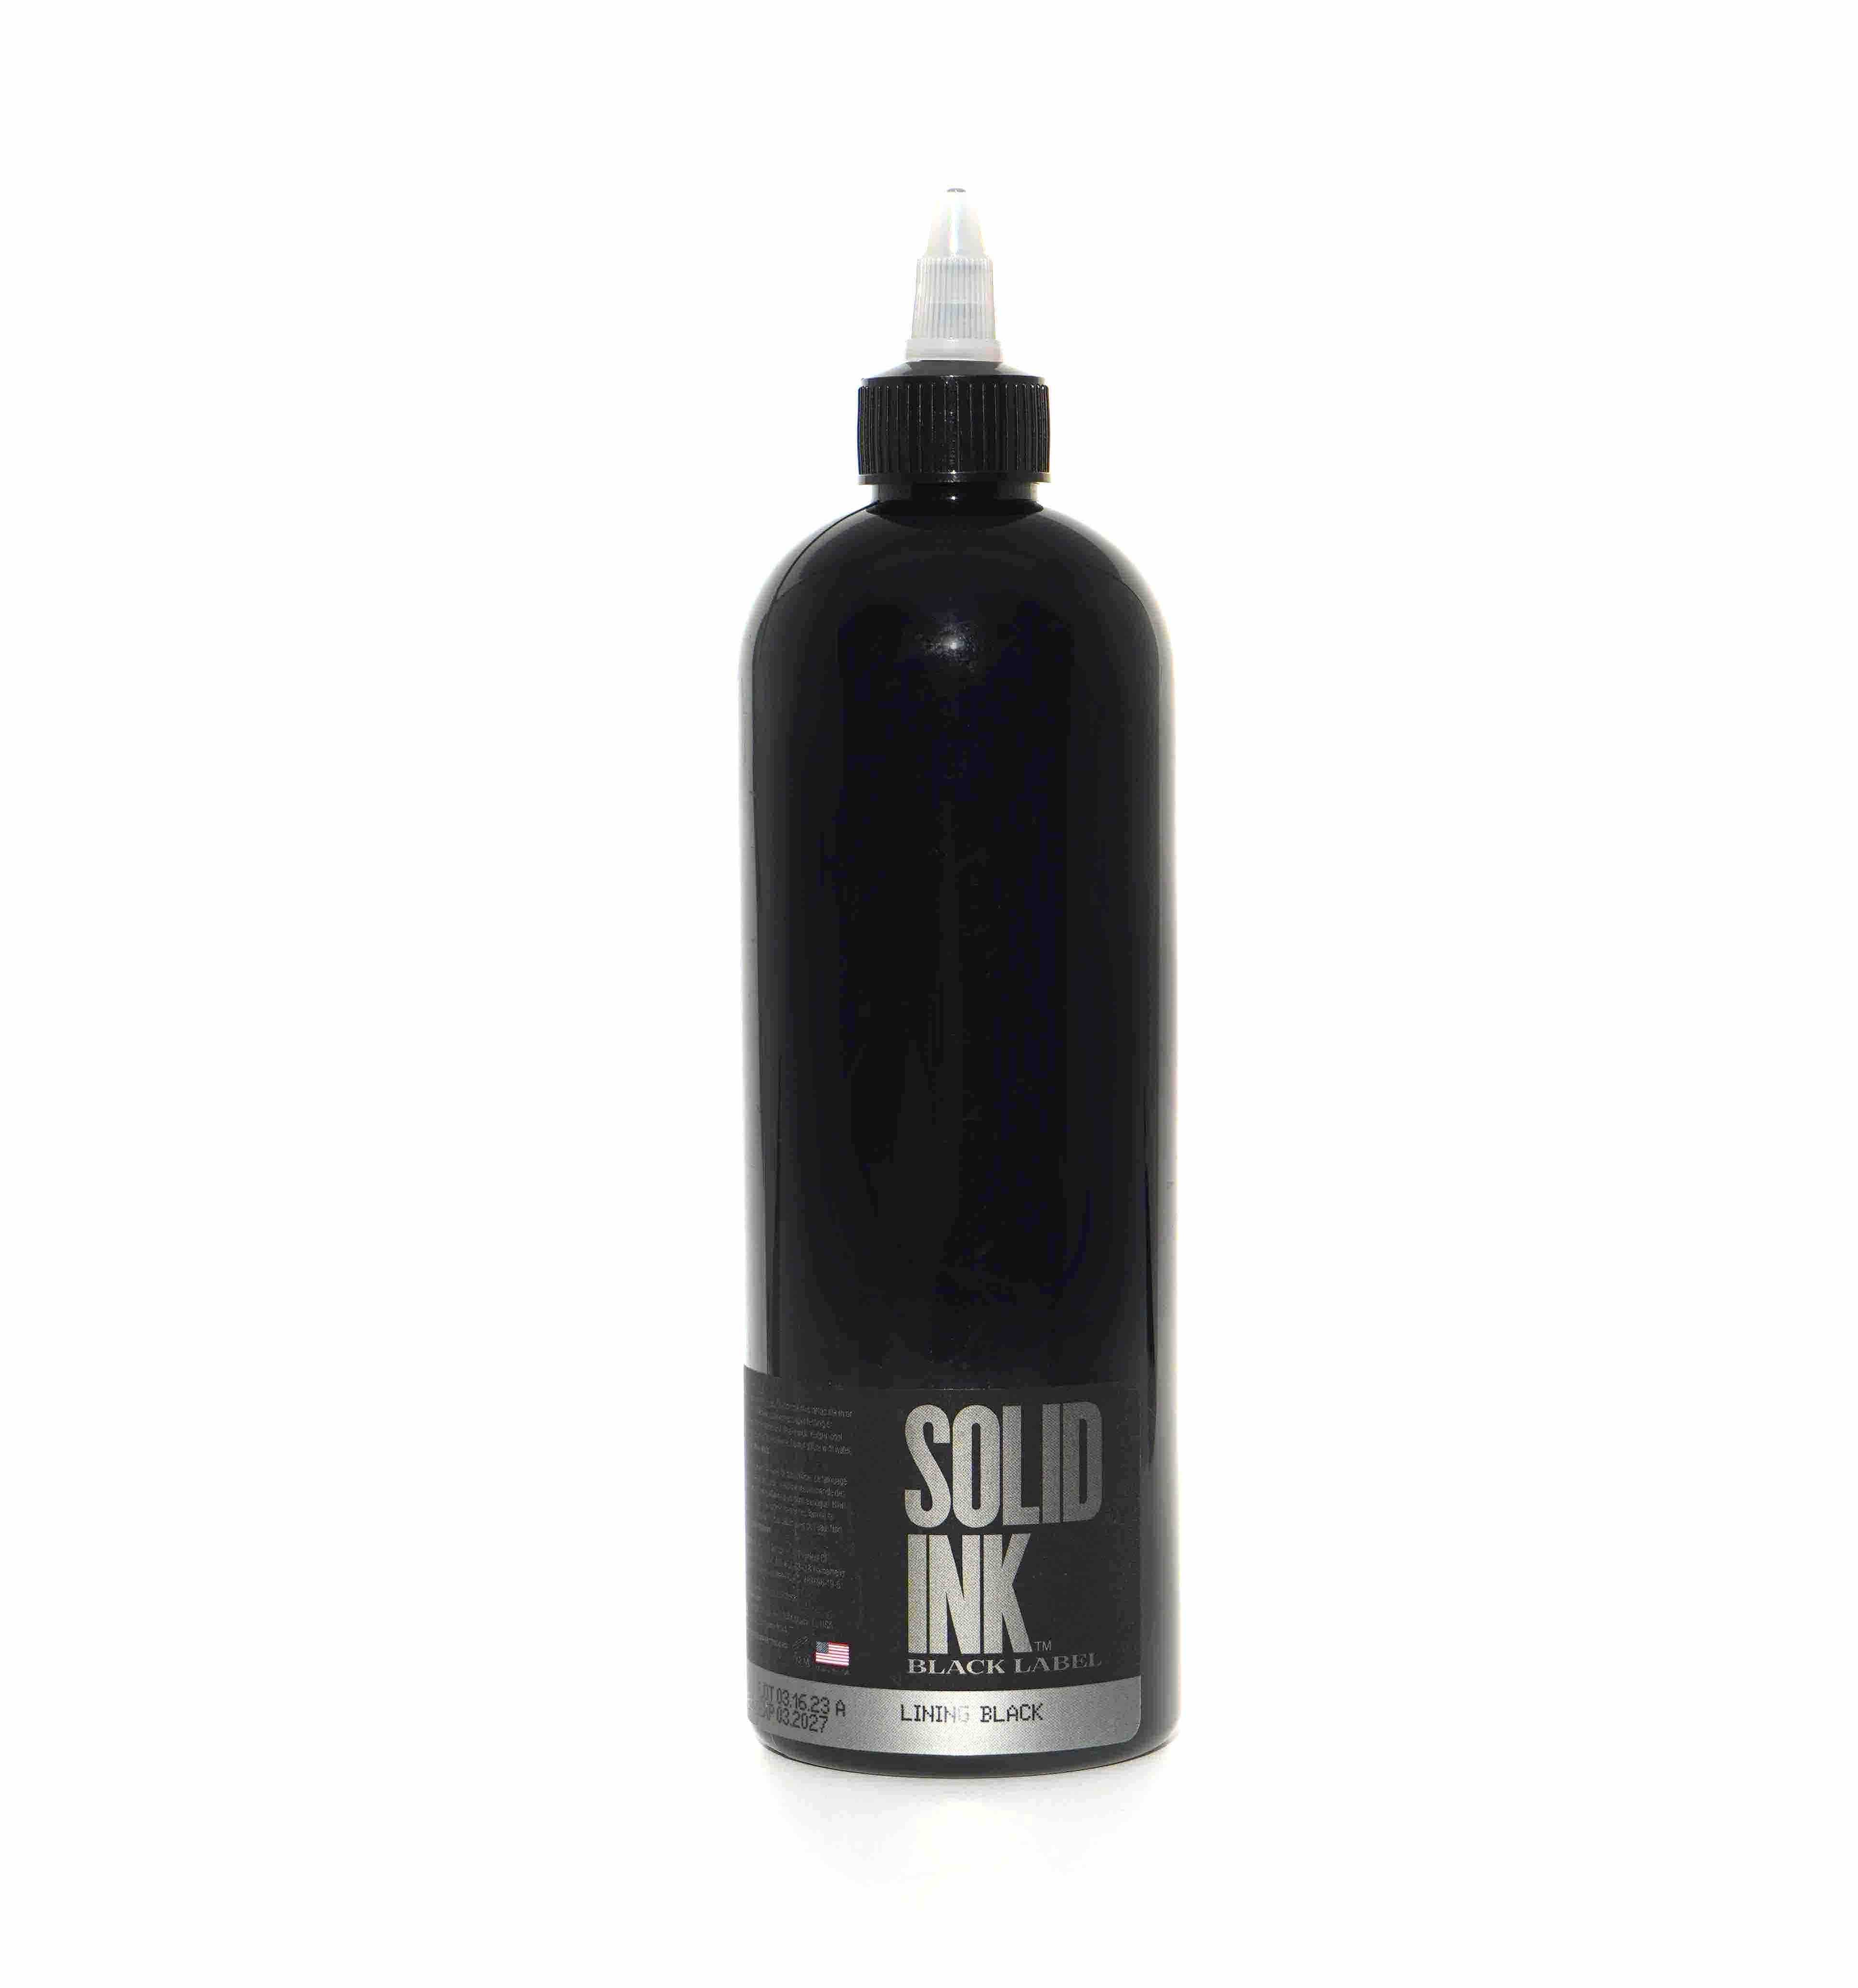 THE SOLID INK on Instagram: 16 oz 💥 Limited units available, Lining Black  only #solidink #tattooink #tattoopigments #tattoo #ink #liningblack  #thesolidink